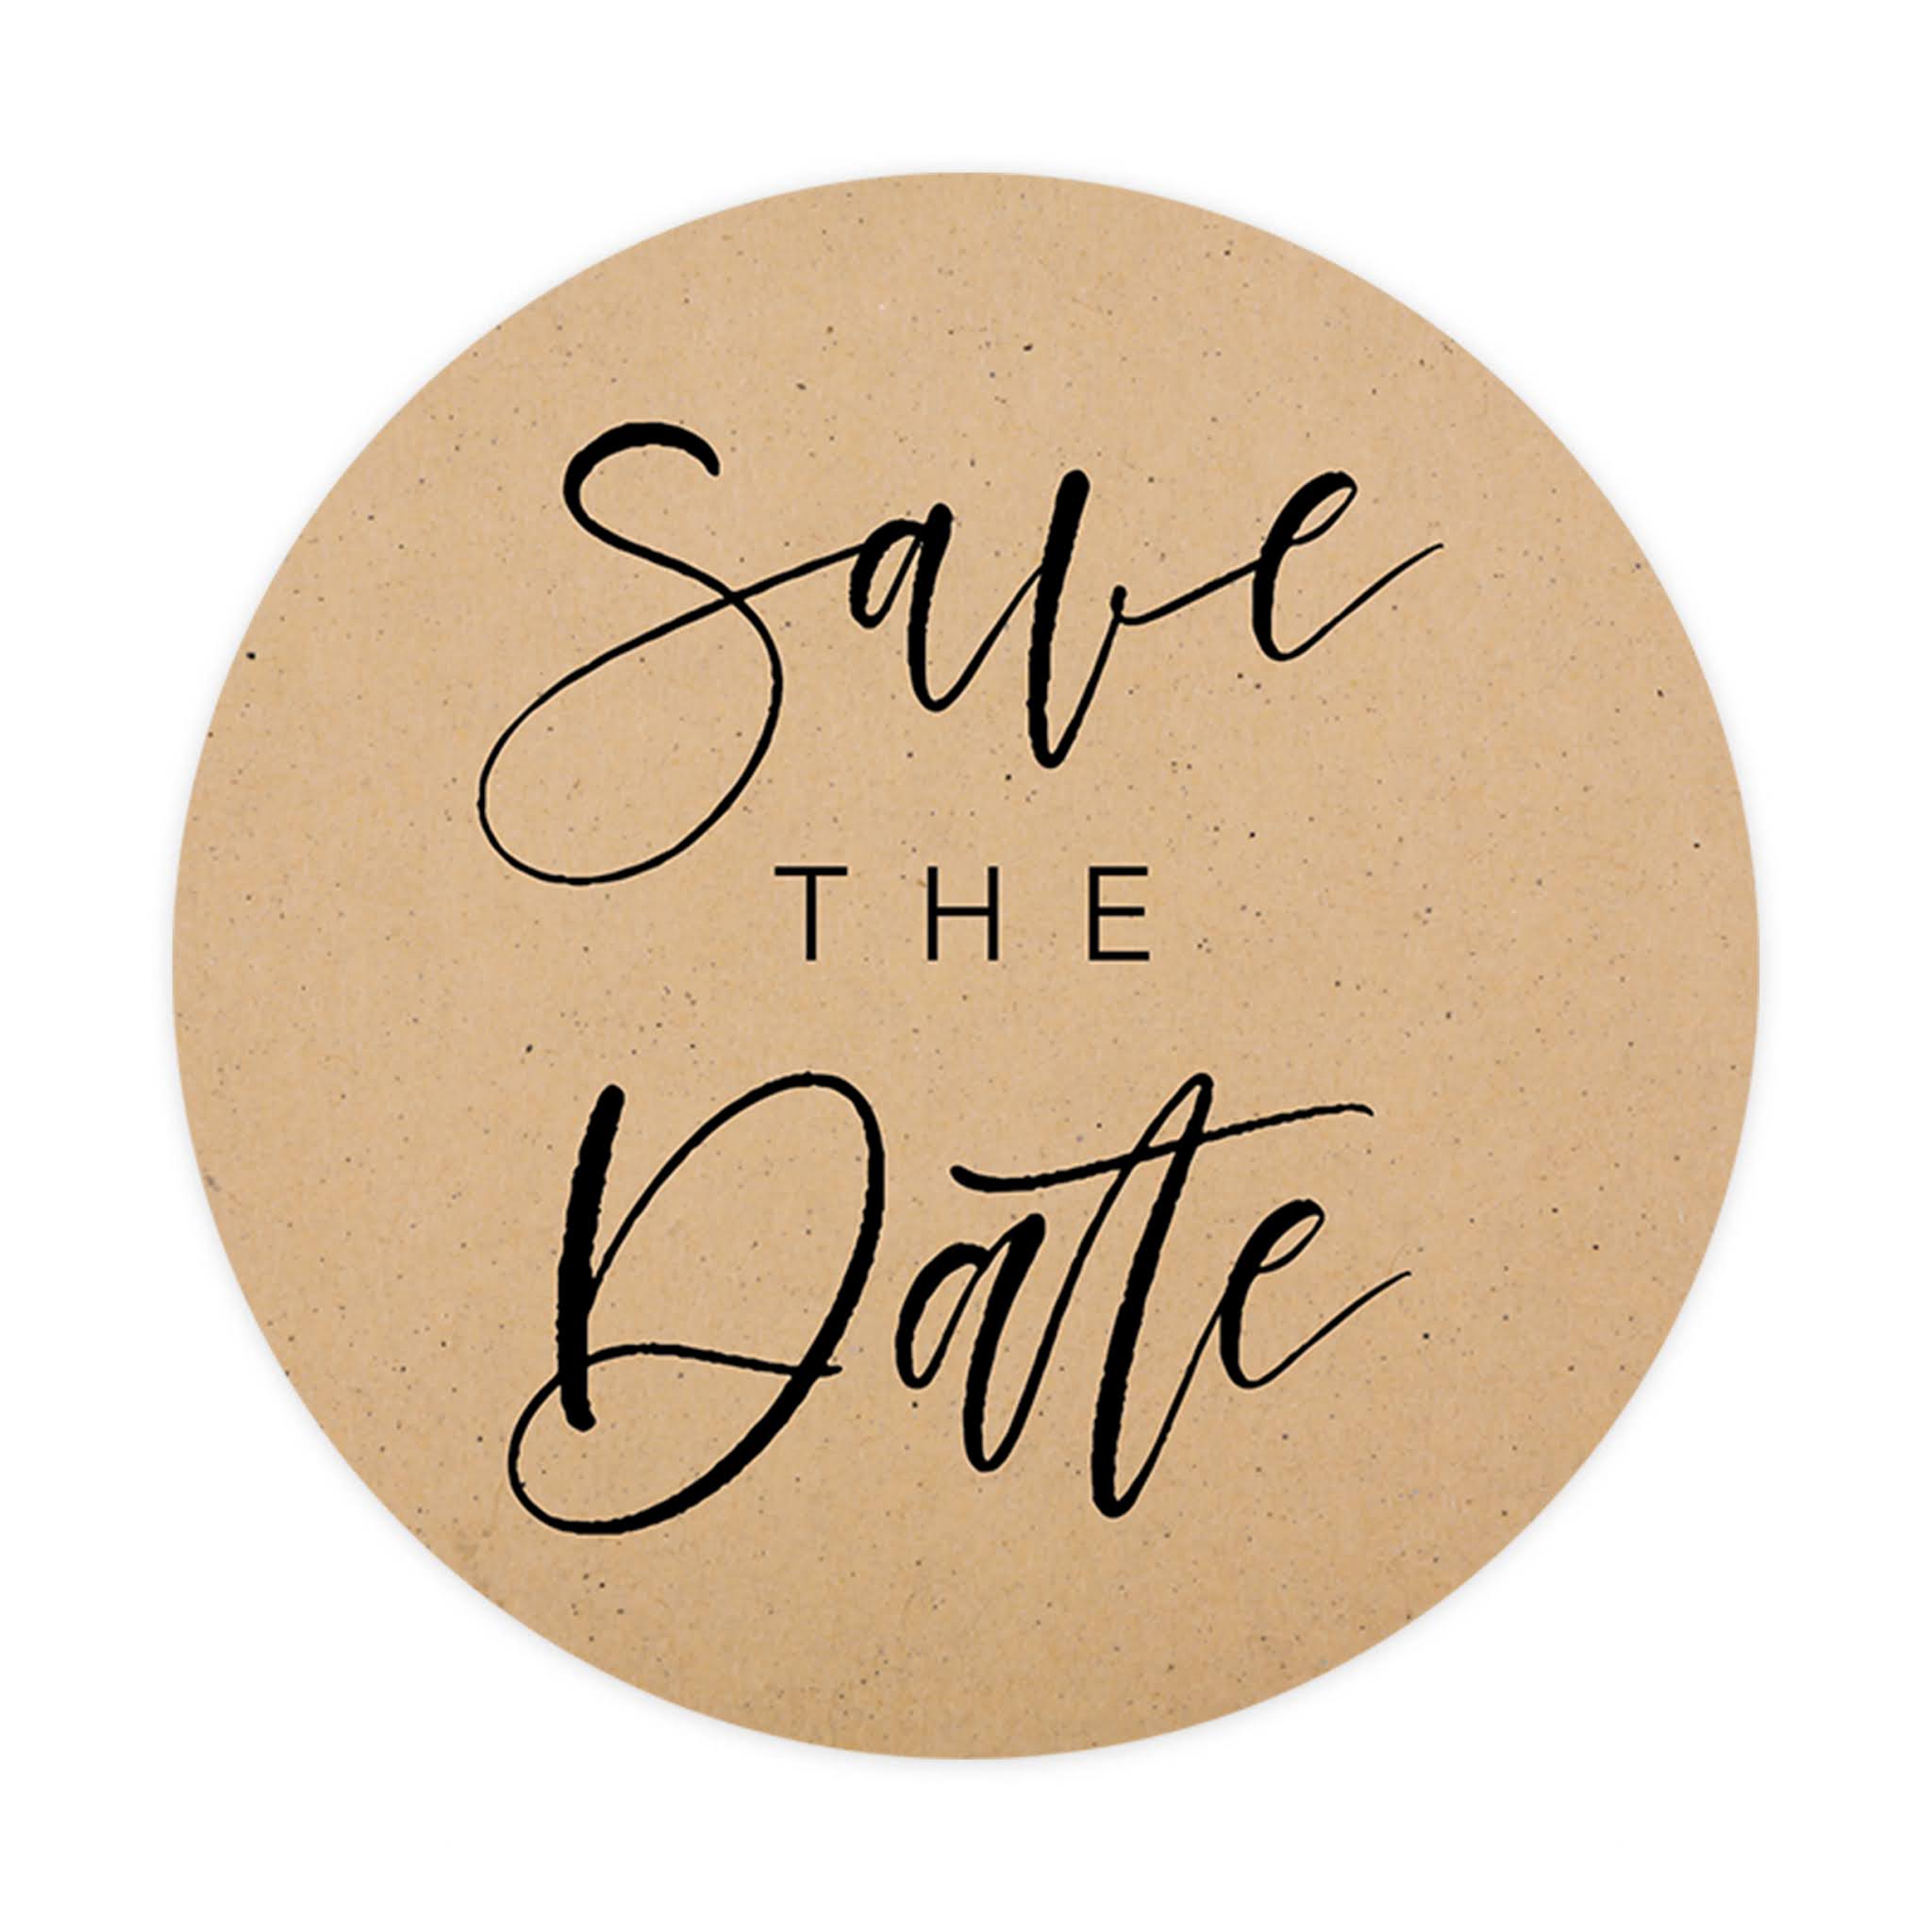 Save the Date Stickers, Wedding Favor Stickers, Rose Gold Foil Stickers,  Foil Transparent Stickers, Envelope Seals, Clear Stickers, Calligraphy